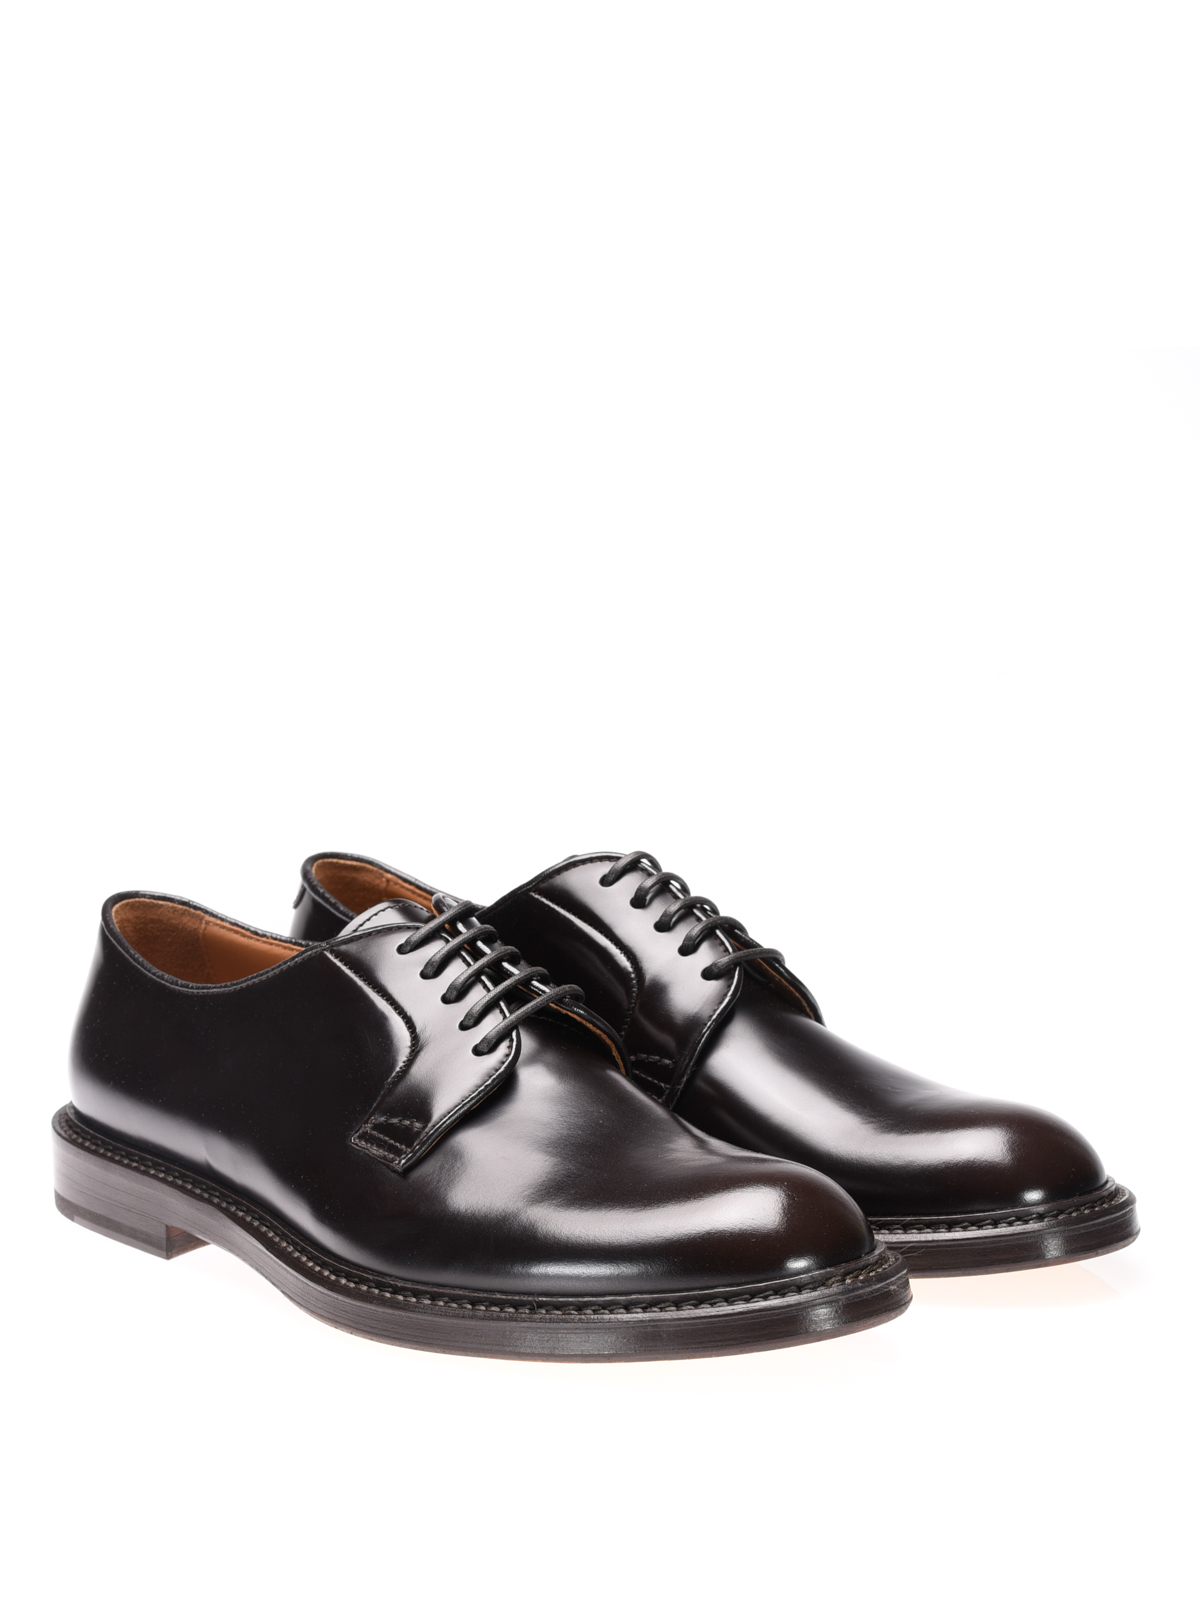 Doucal's - Leather classic Derby shoes - classic shoes ...